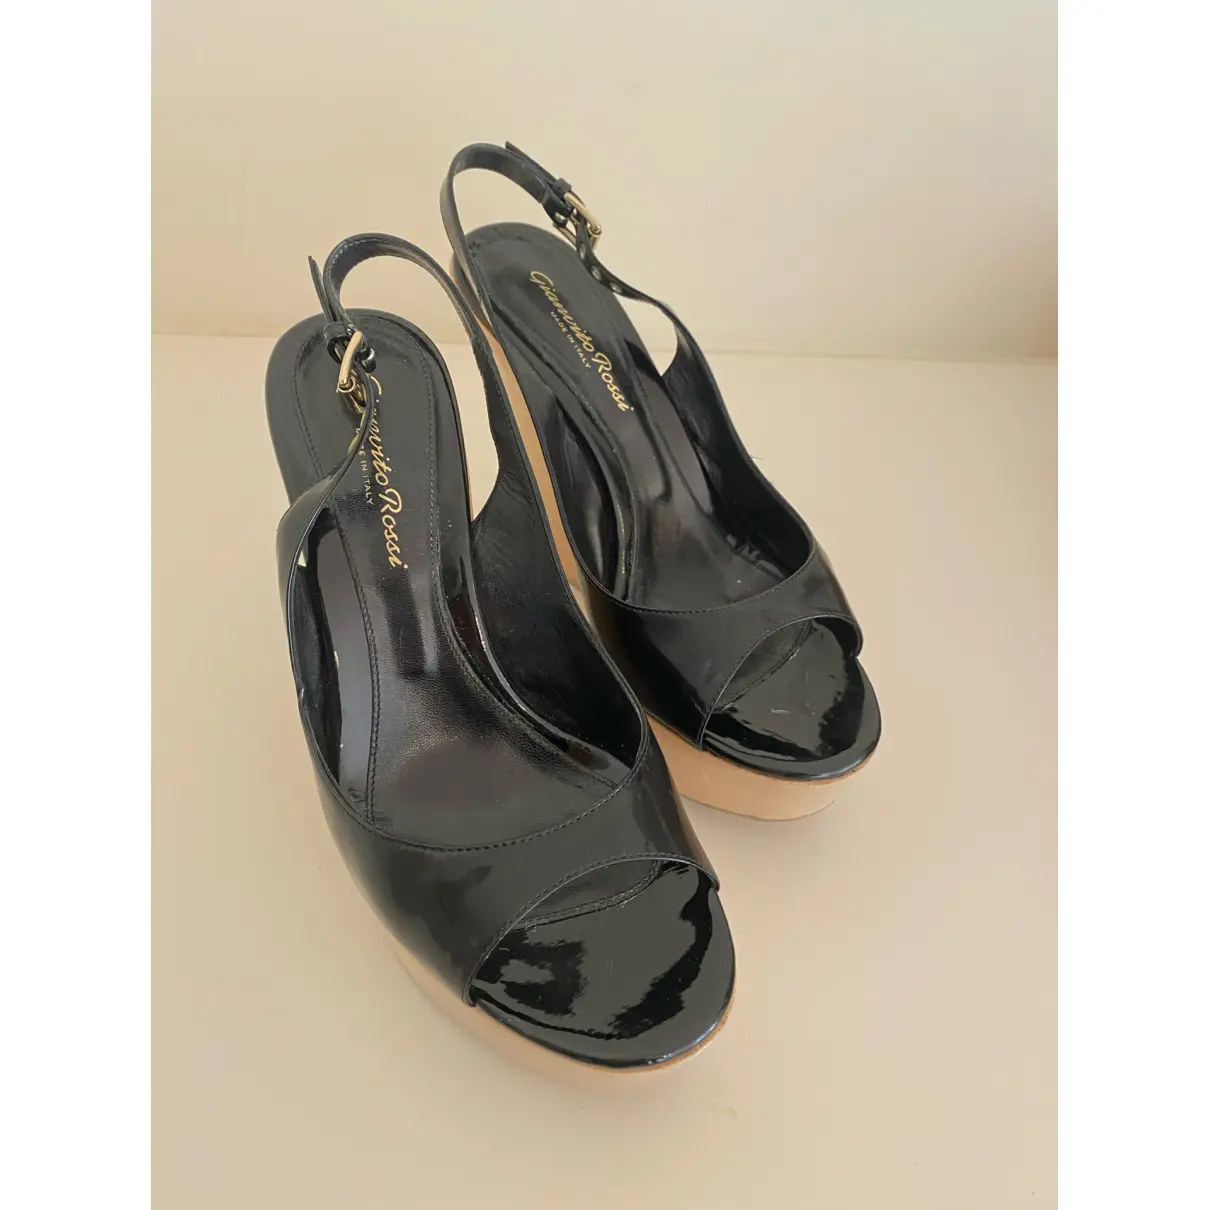 Buy Gianvito Rossi Patent leather sandals online